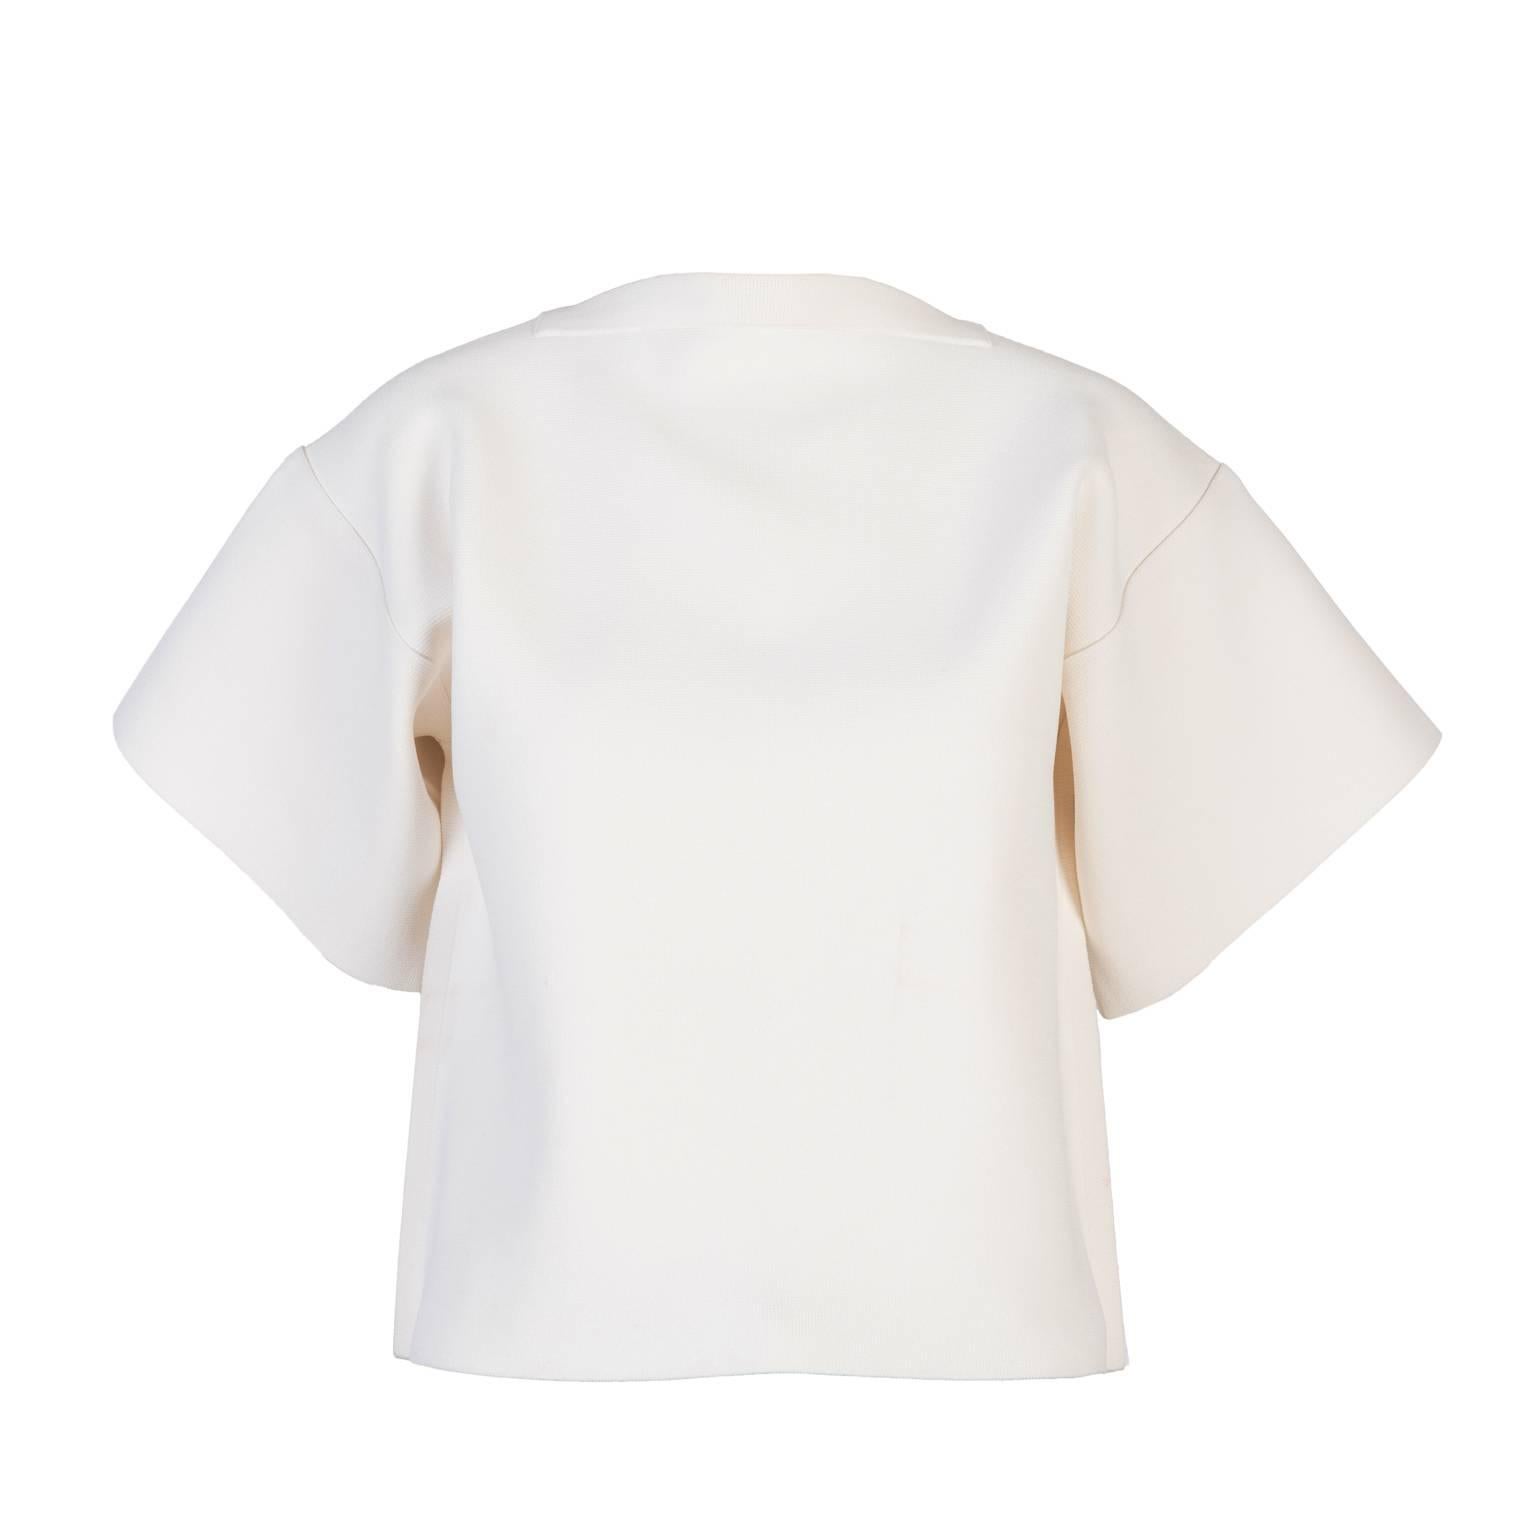 Maison Martin Margiela Heavy Knit Structured Top For Sale